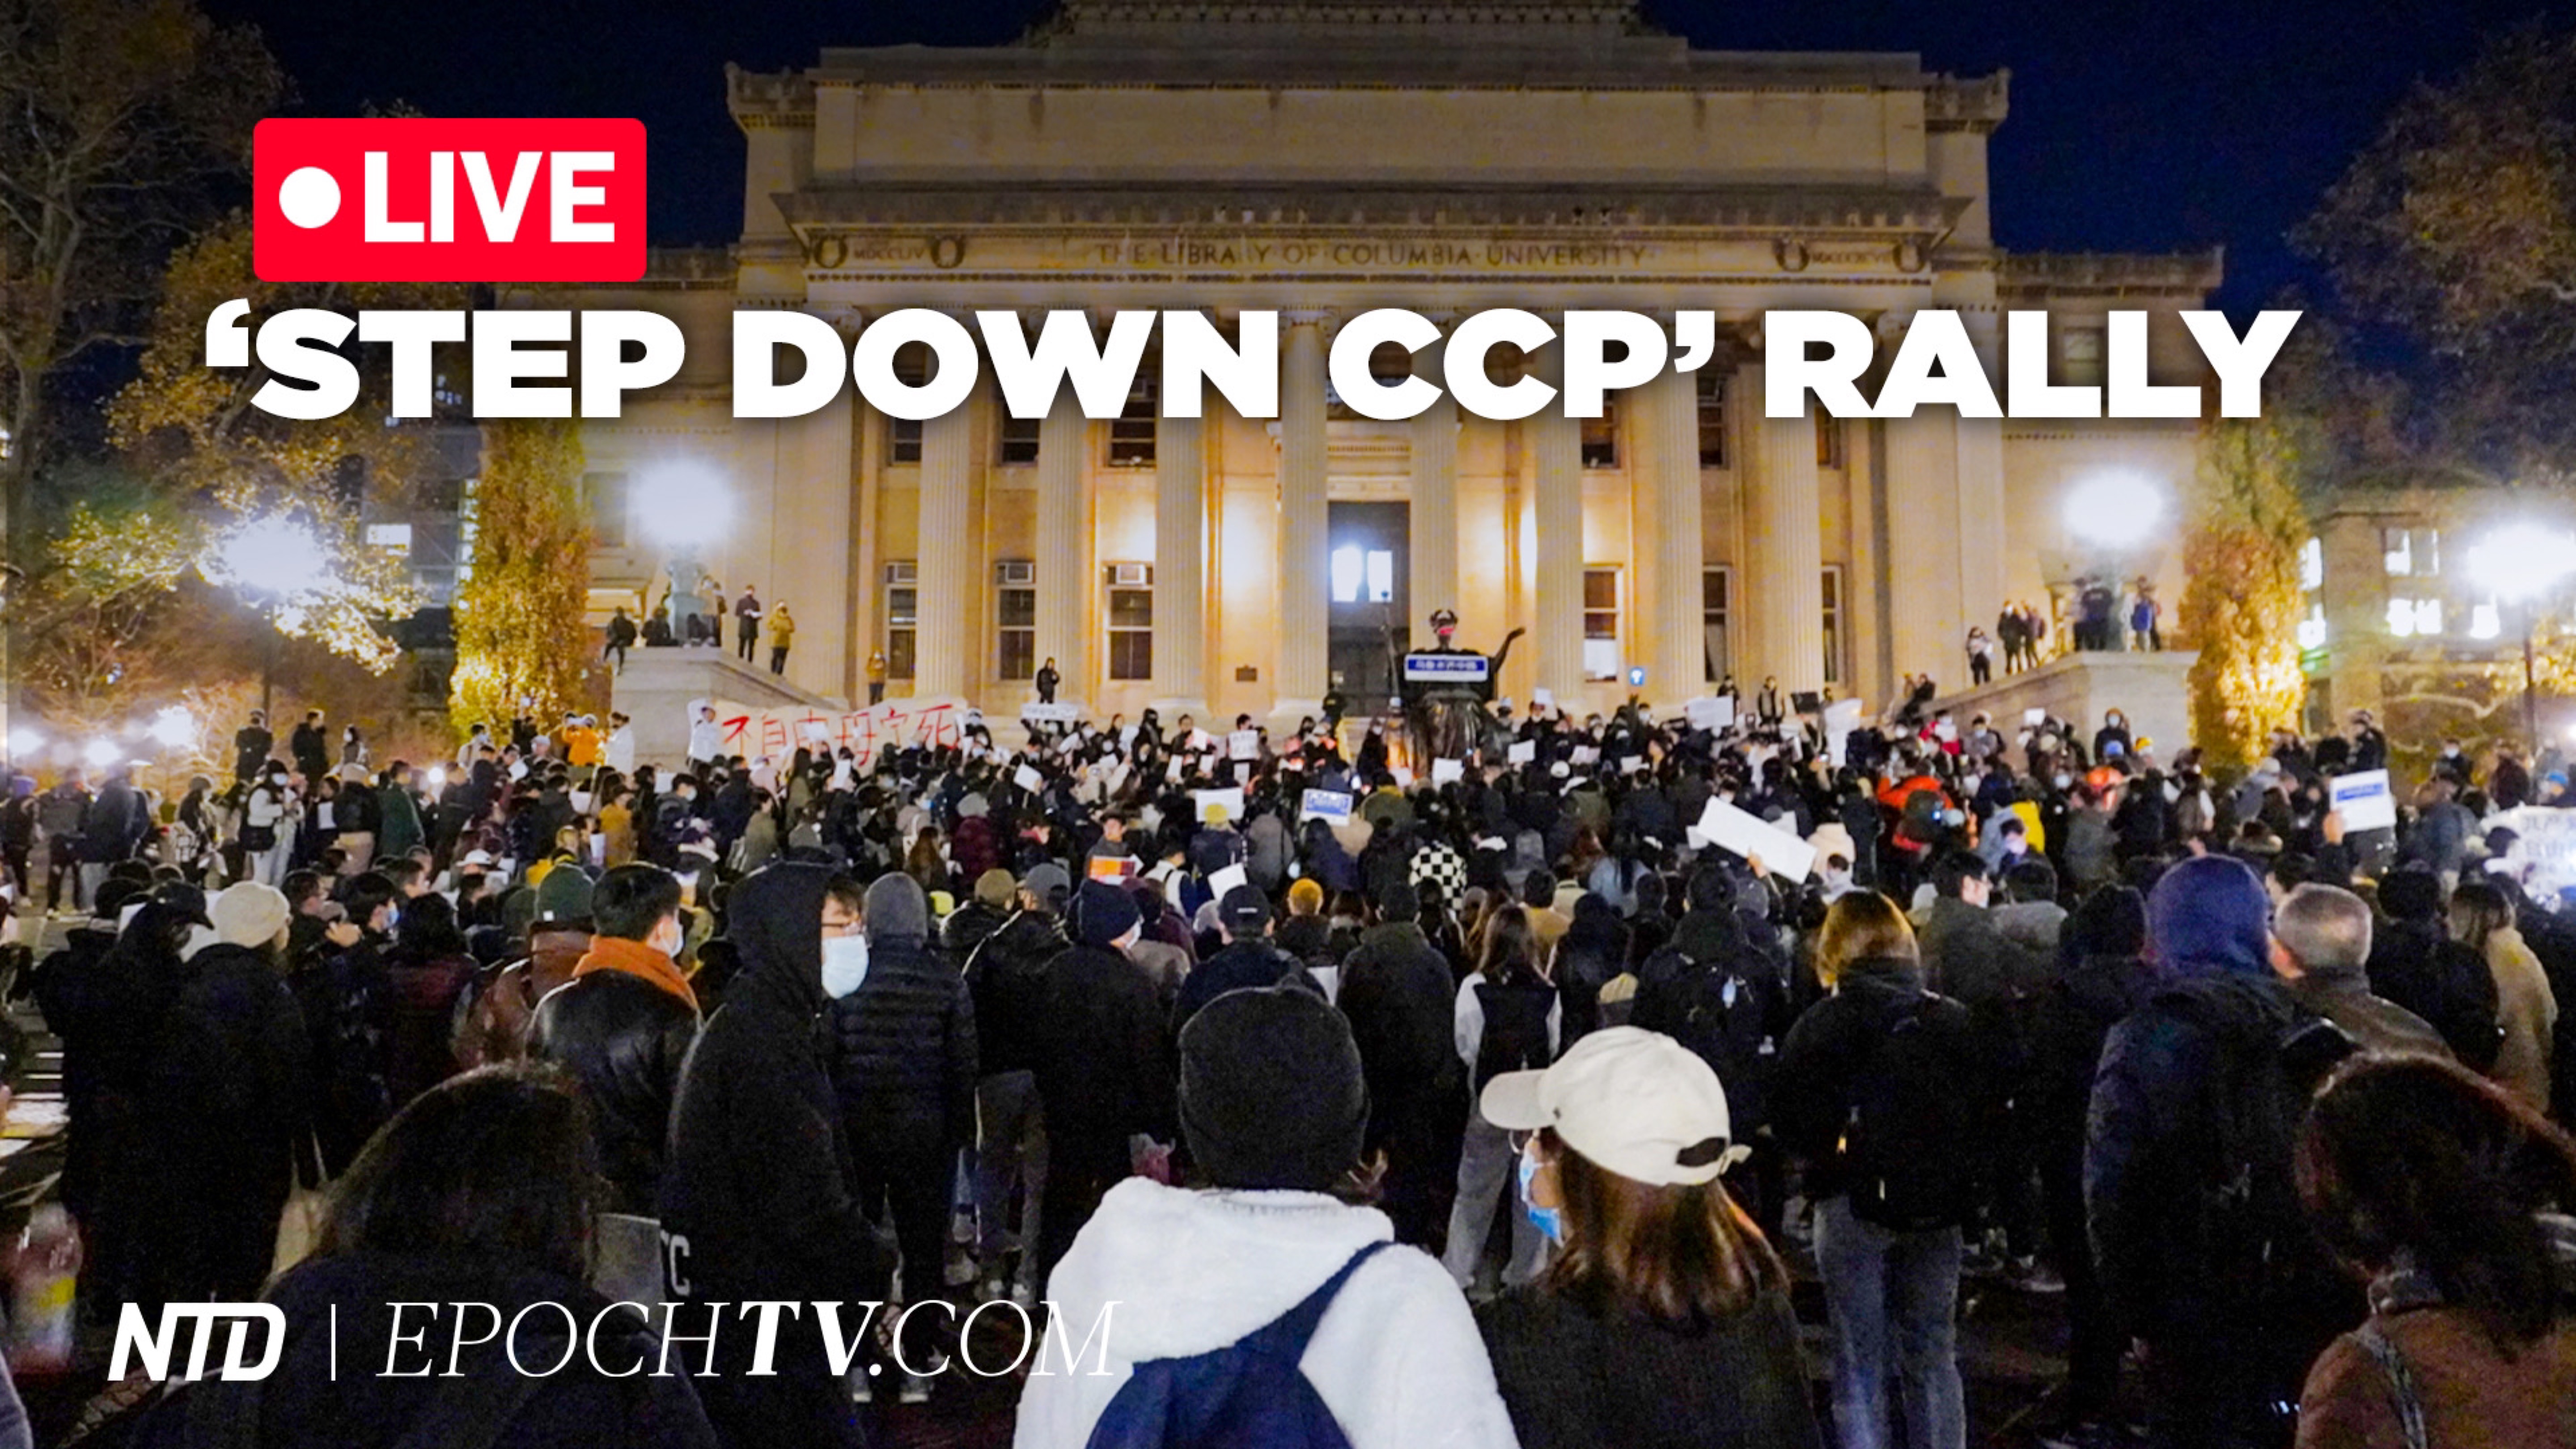 LIVE: Protest Against CCP Tyranny & China’s COVID Lockdowns in New York’s Washington Square Park